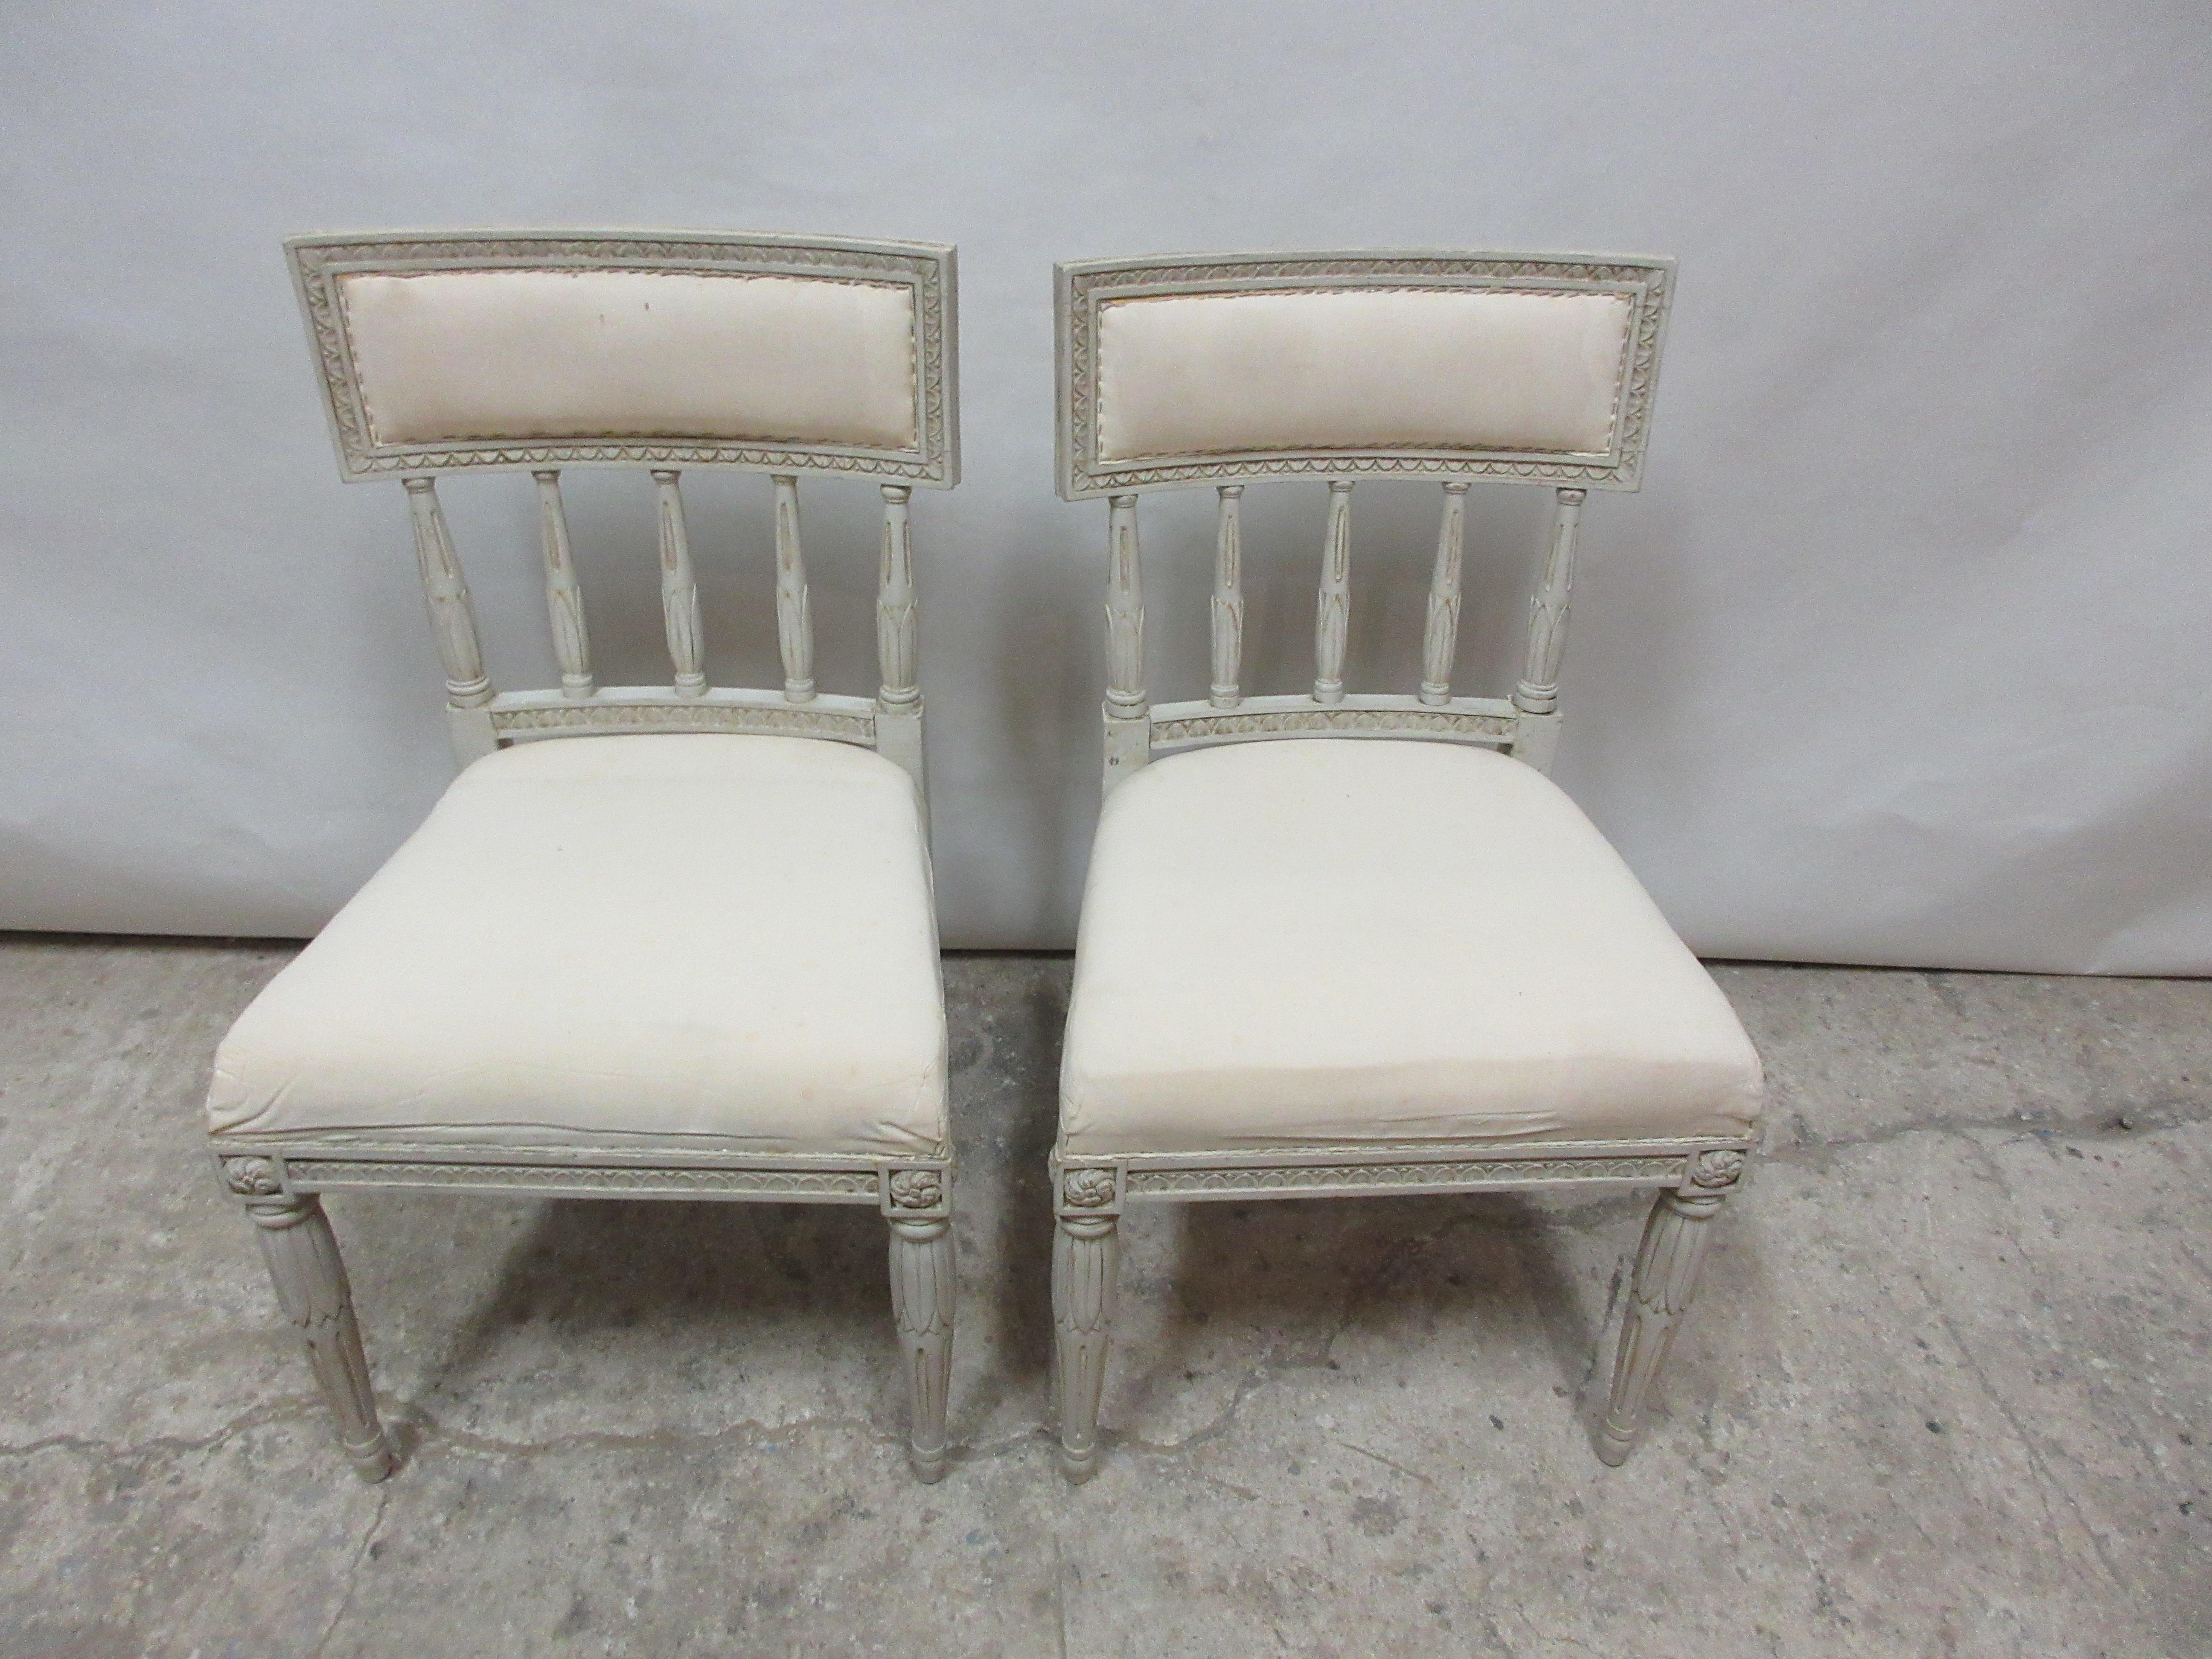 This is a set of 2 Swedish Gustavian side chairs. they have been restored and repainted with milk paints 